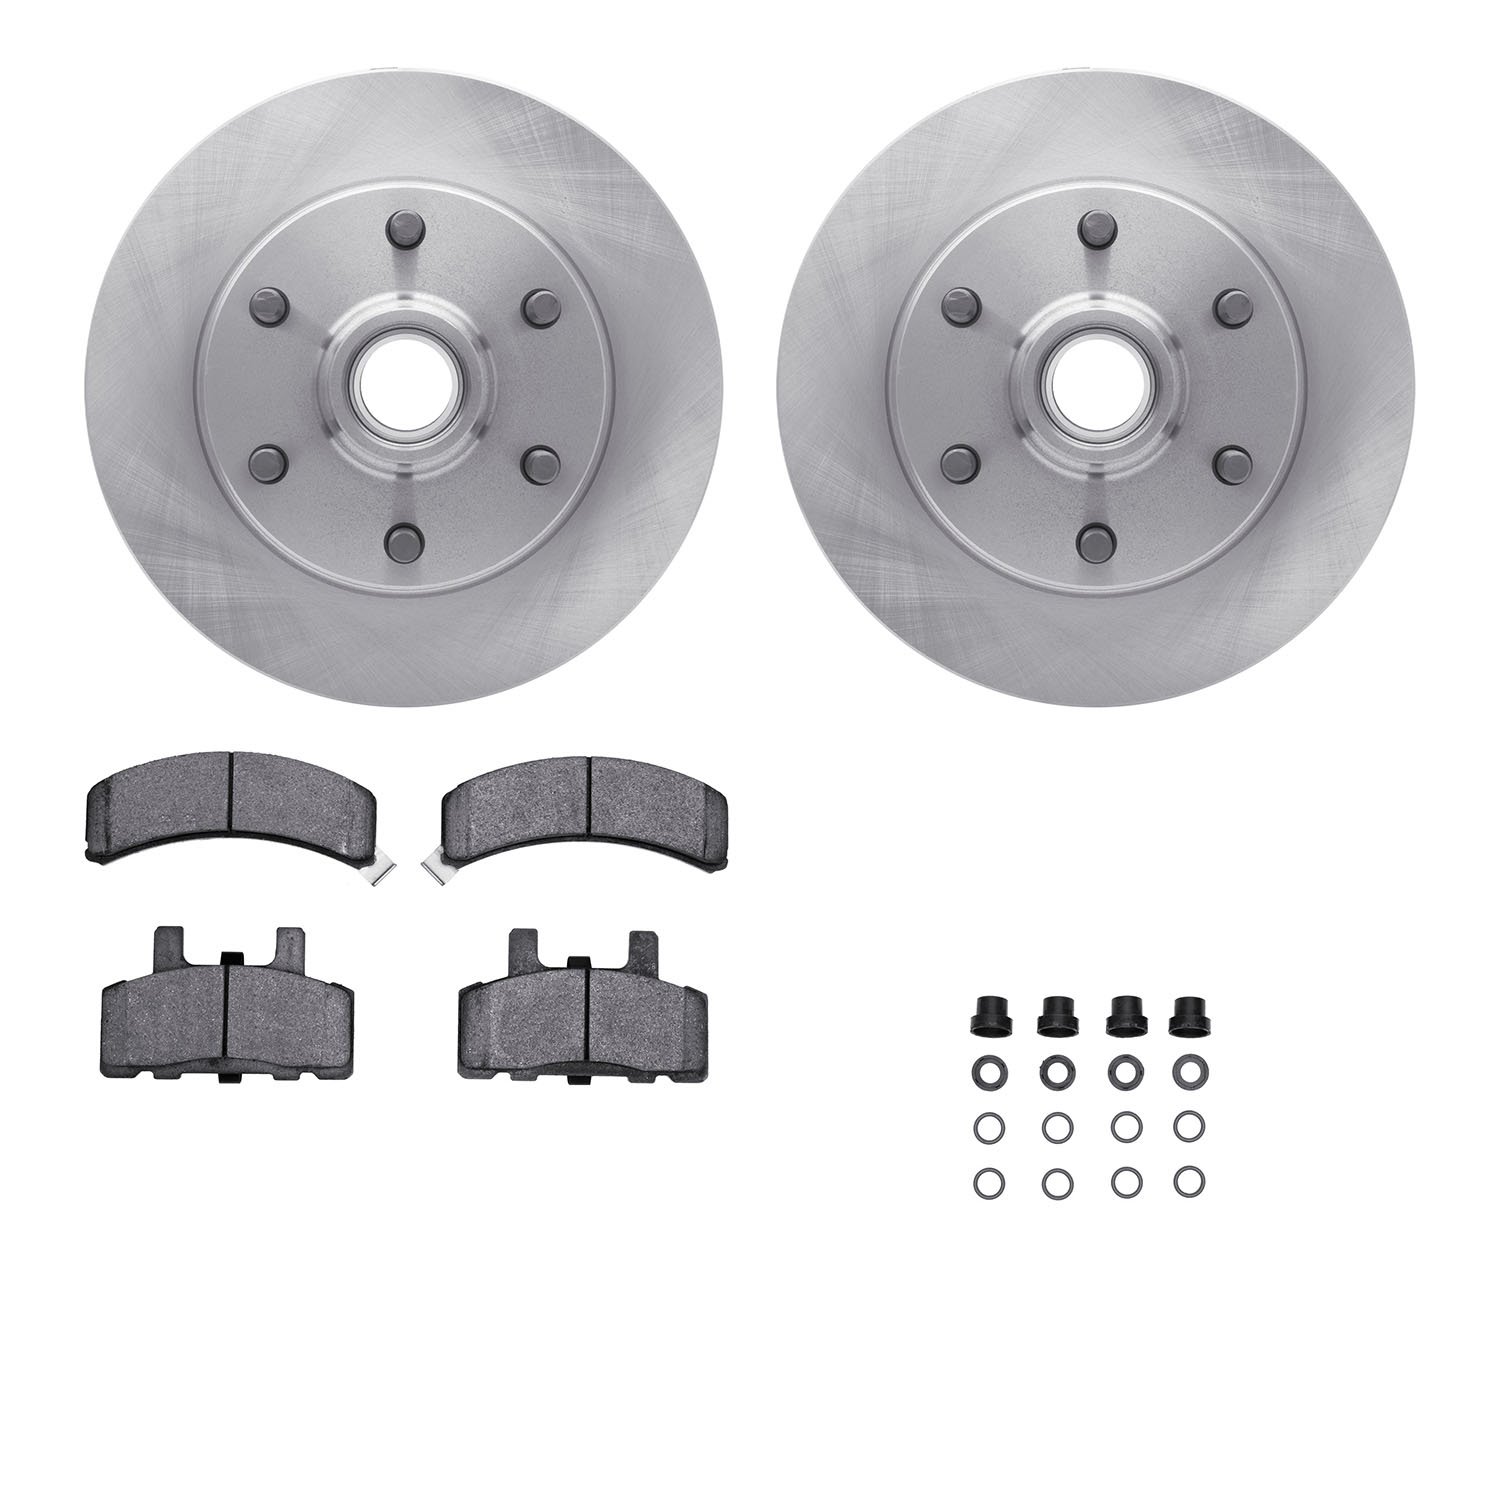 6412-48016 Brake Rotors with Ultimate-Duty Brake Pads Kit & Hardware, 1988-1996 GM, Position: Front